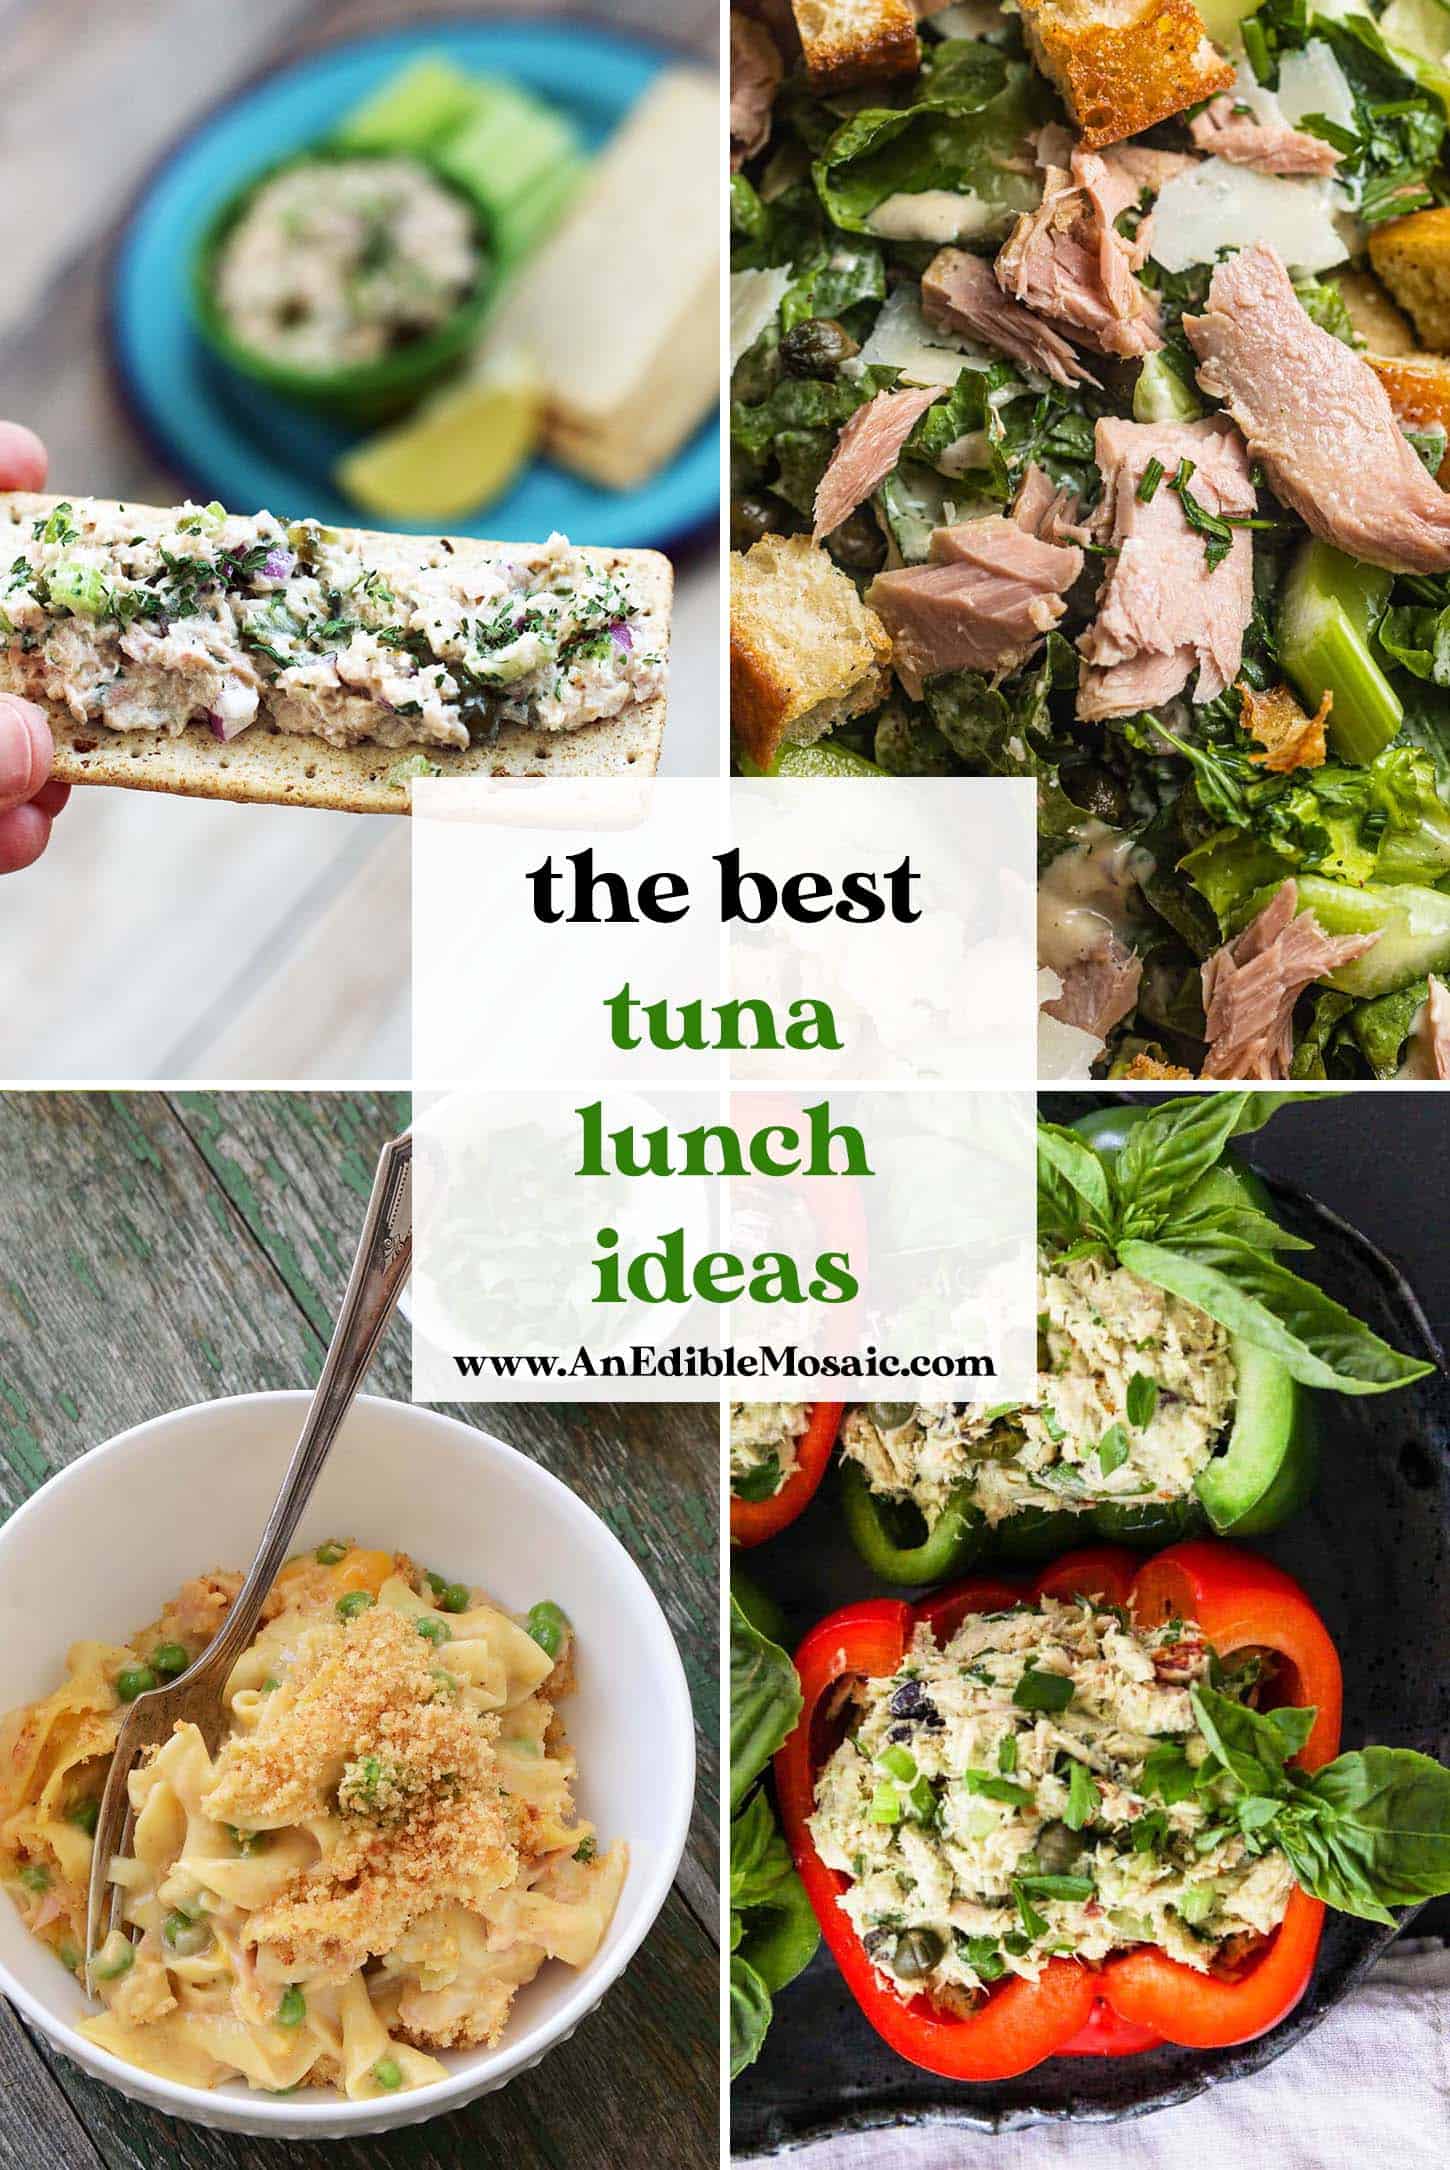 the best tuna lunch ideas pin